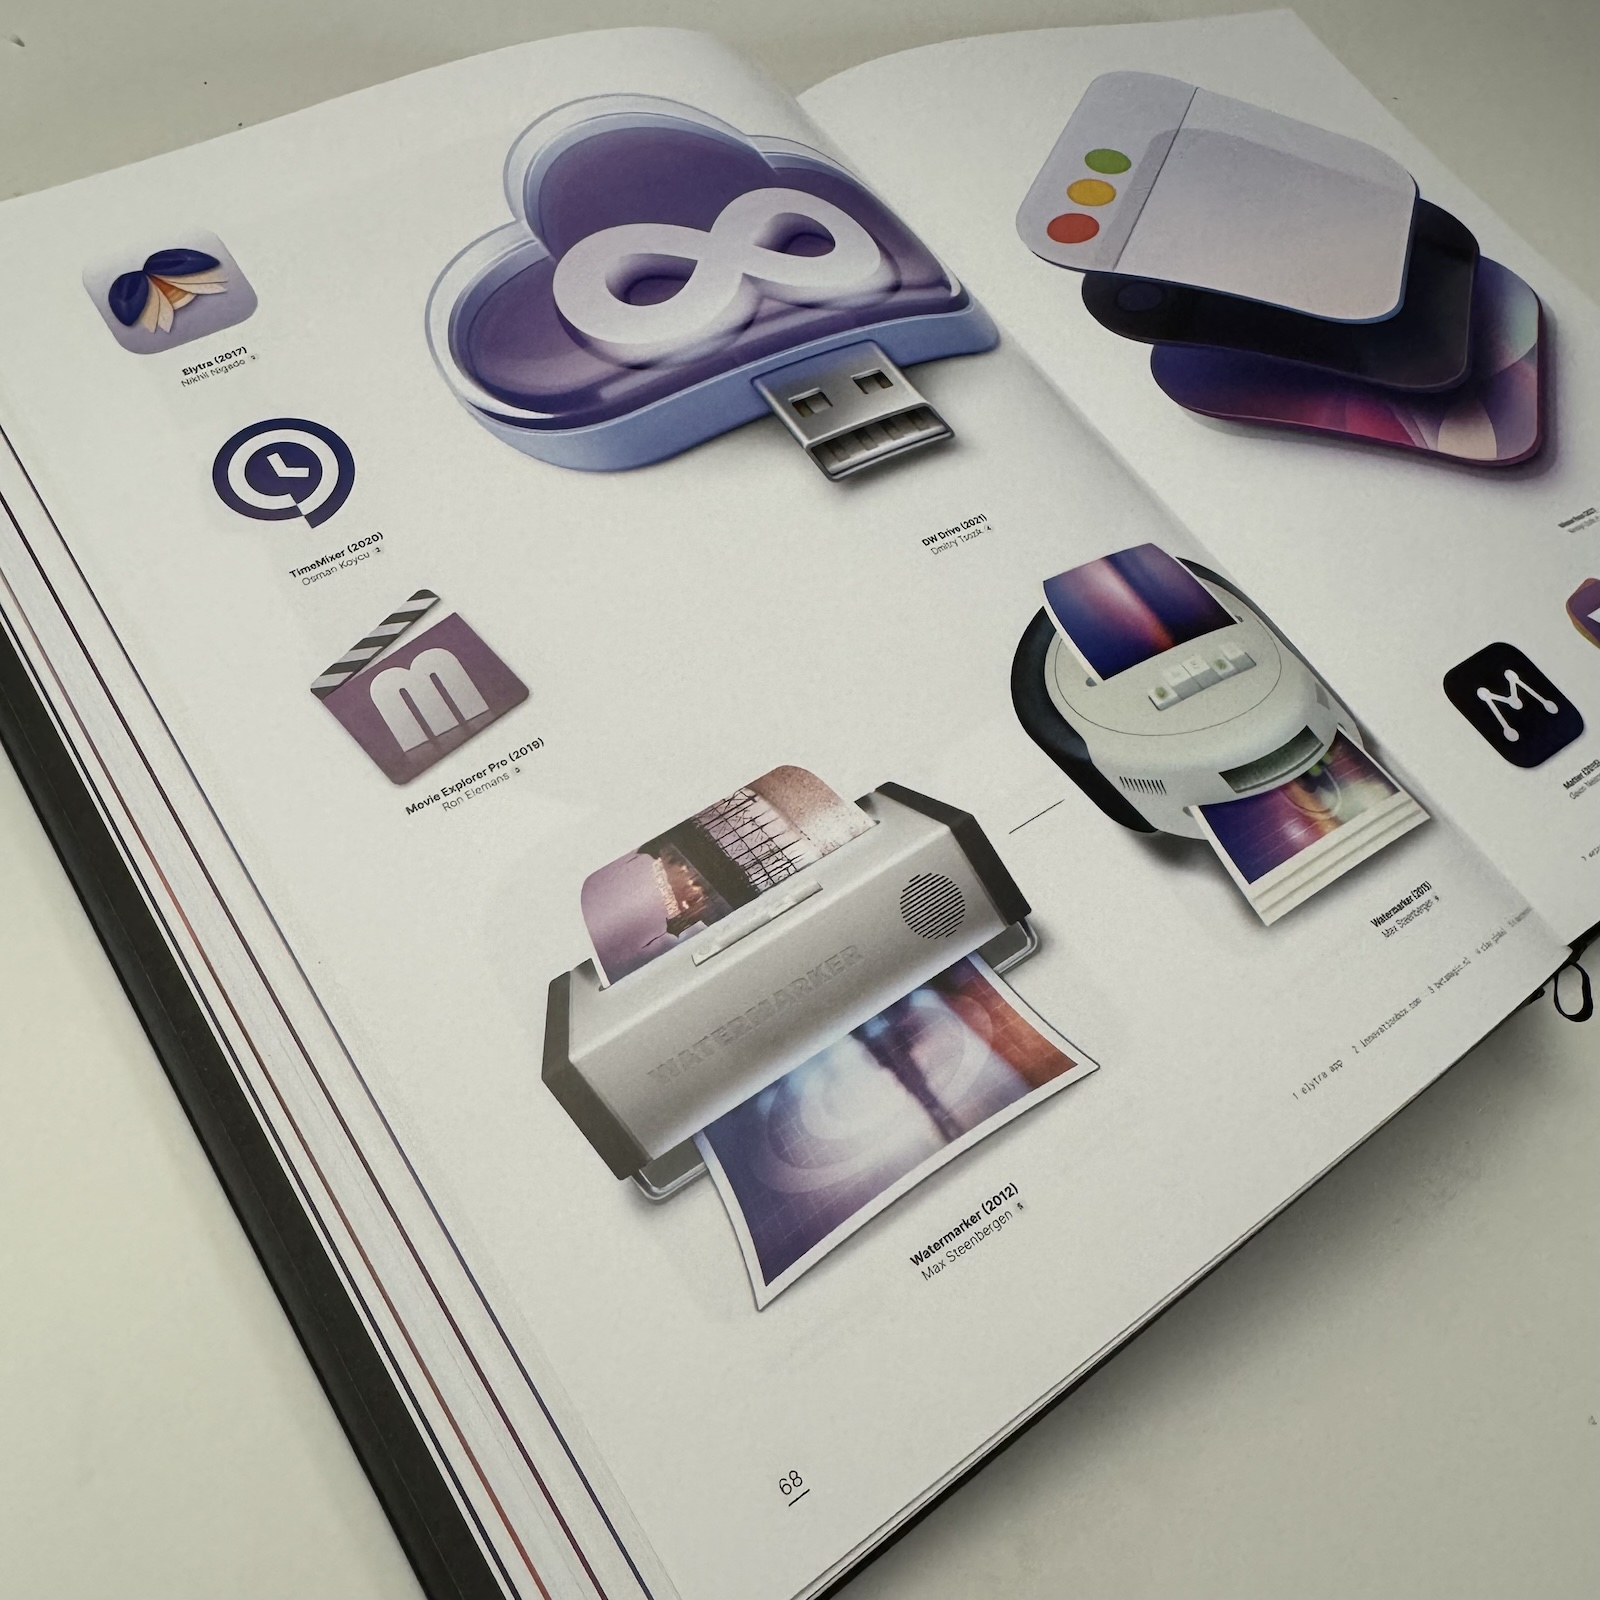 Photograph of the inside of “The macOS App Icon Book” showing a bunch of icons.